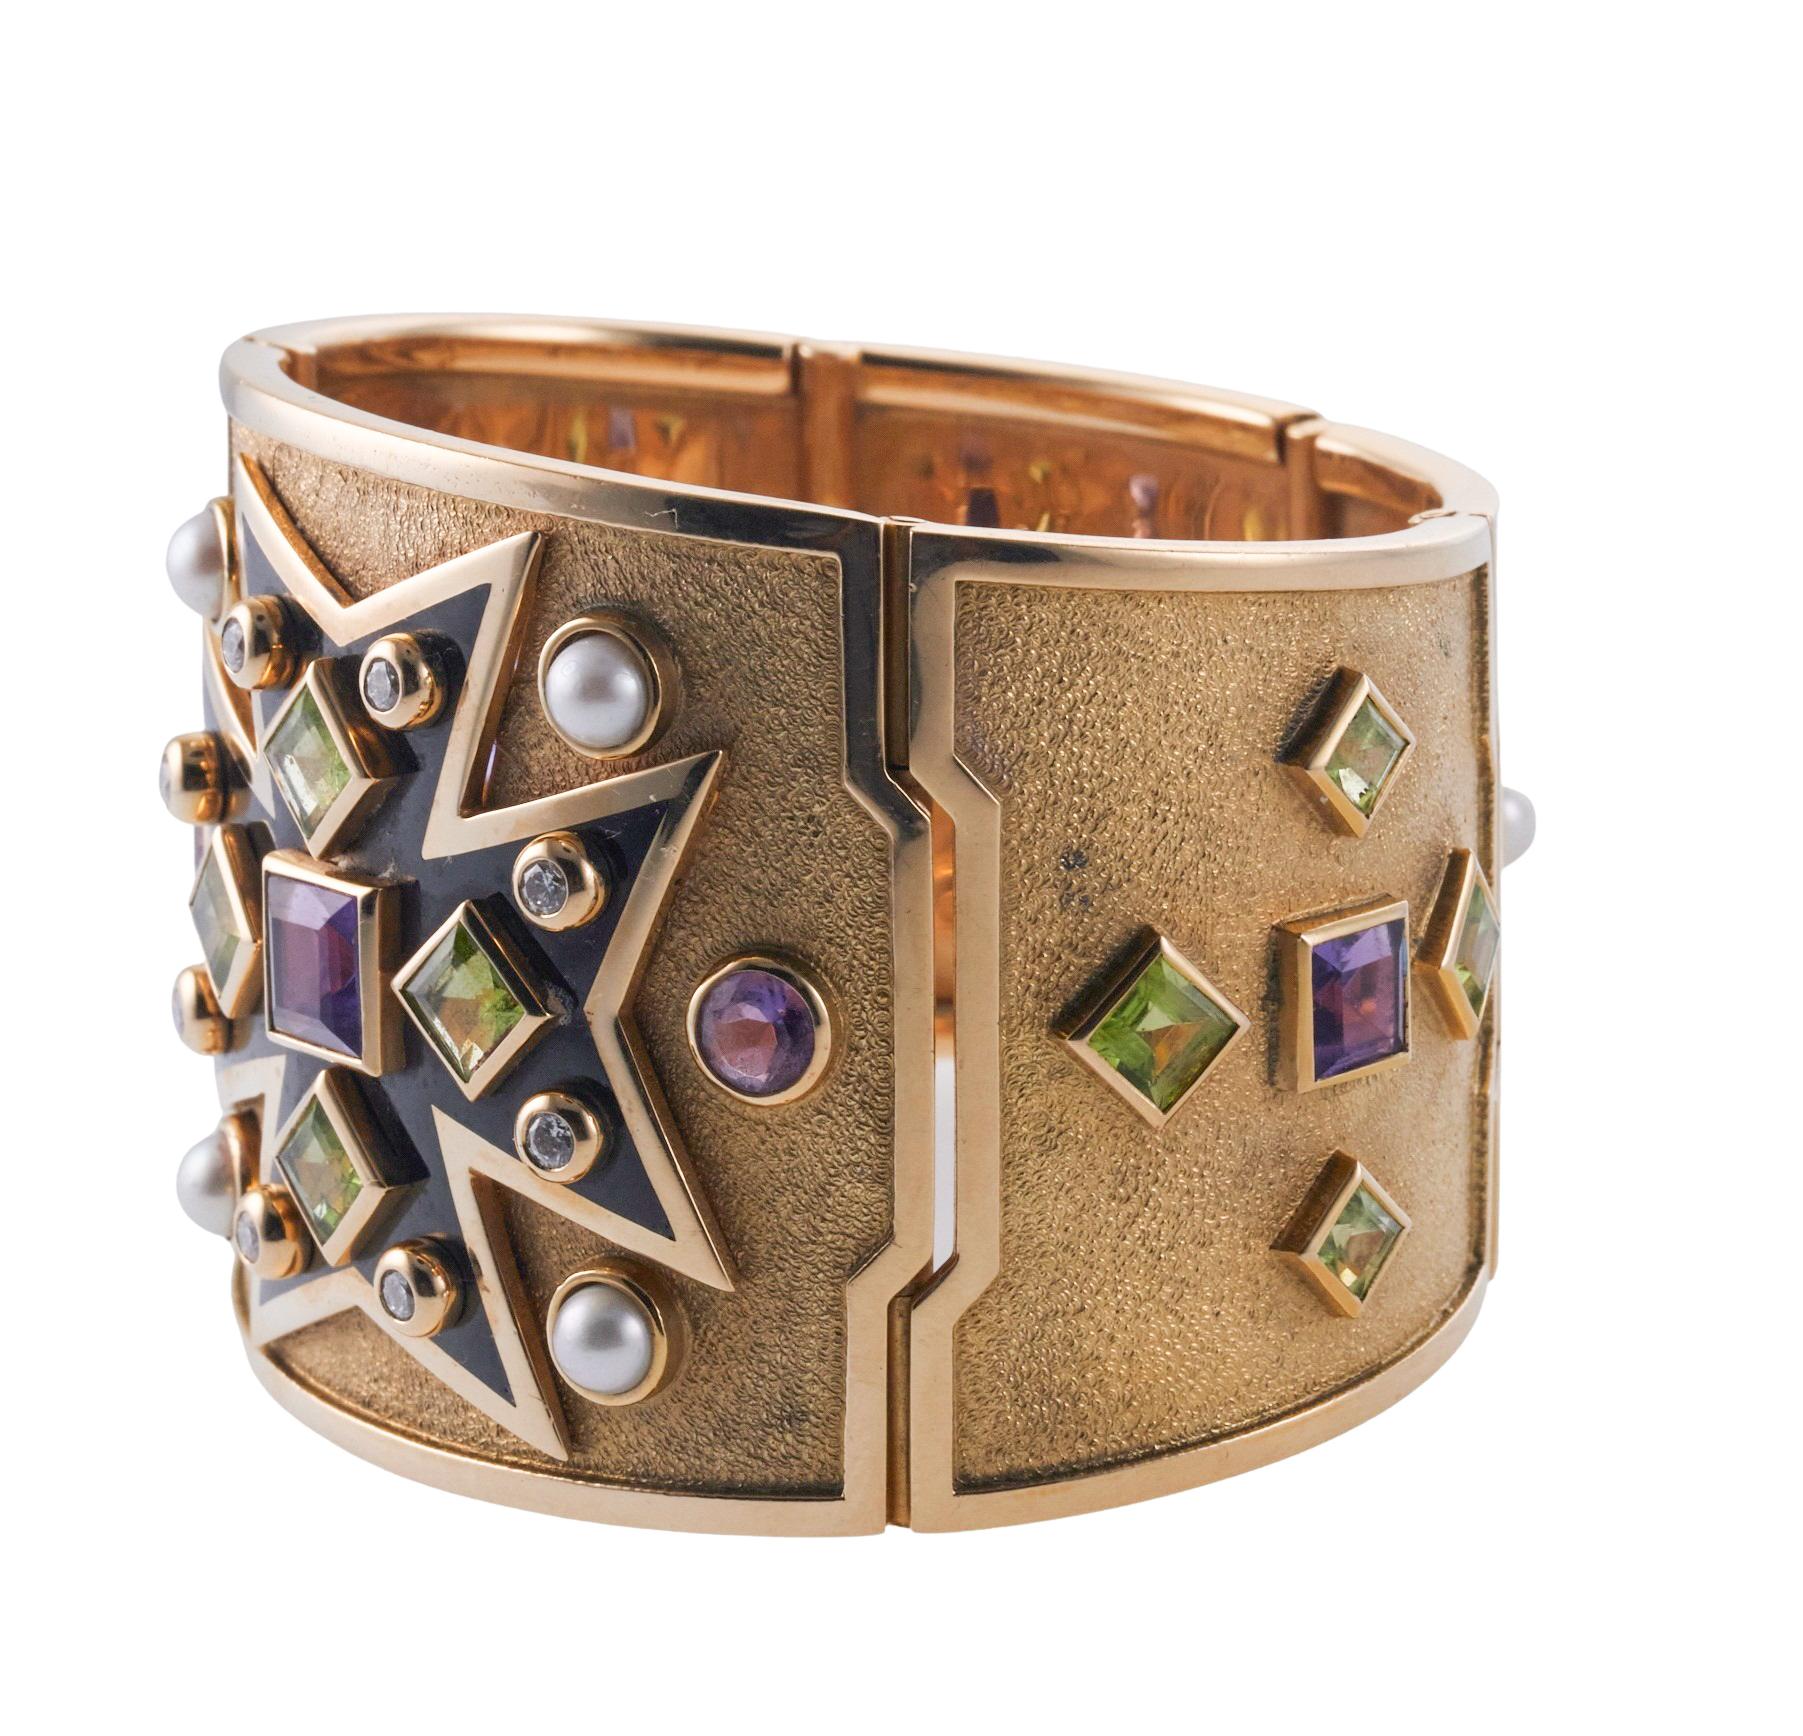 Iconic Maltese Cross wide cuff bracelet by Verdura in 18k gold , set with peridots, pearls, amethyst and approx. 0.40ctw in VS/G diamonds. Bracelet will fit 6